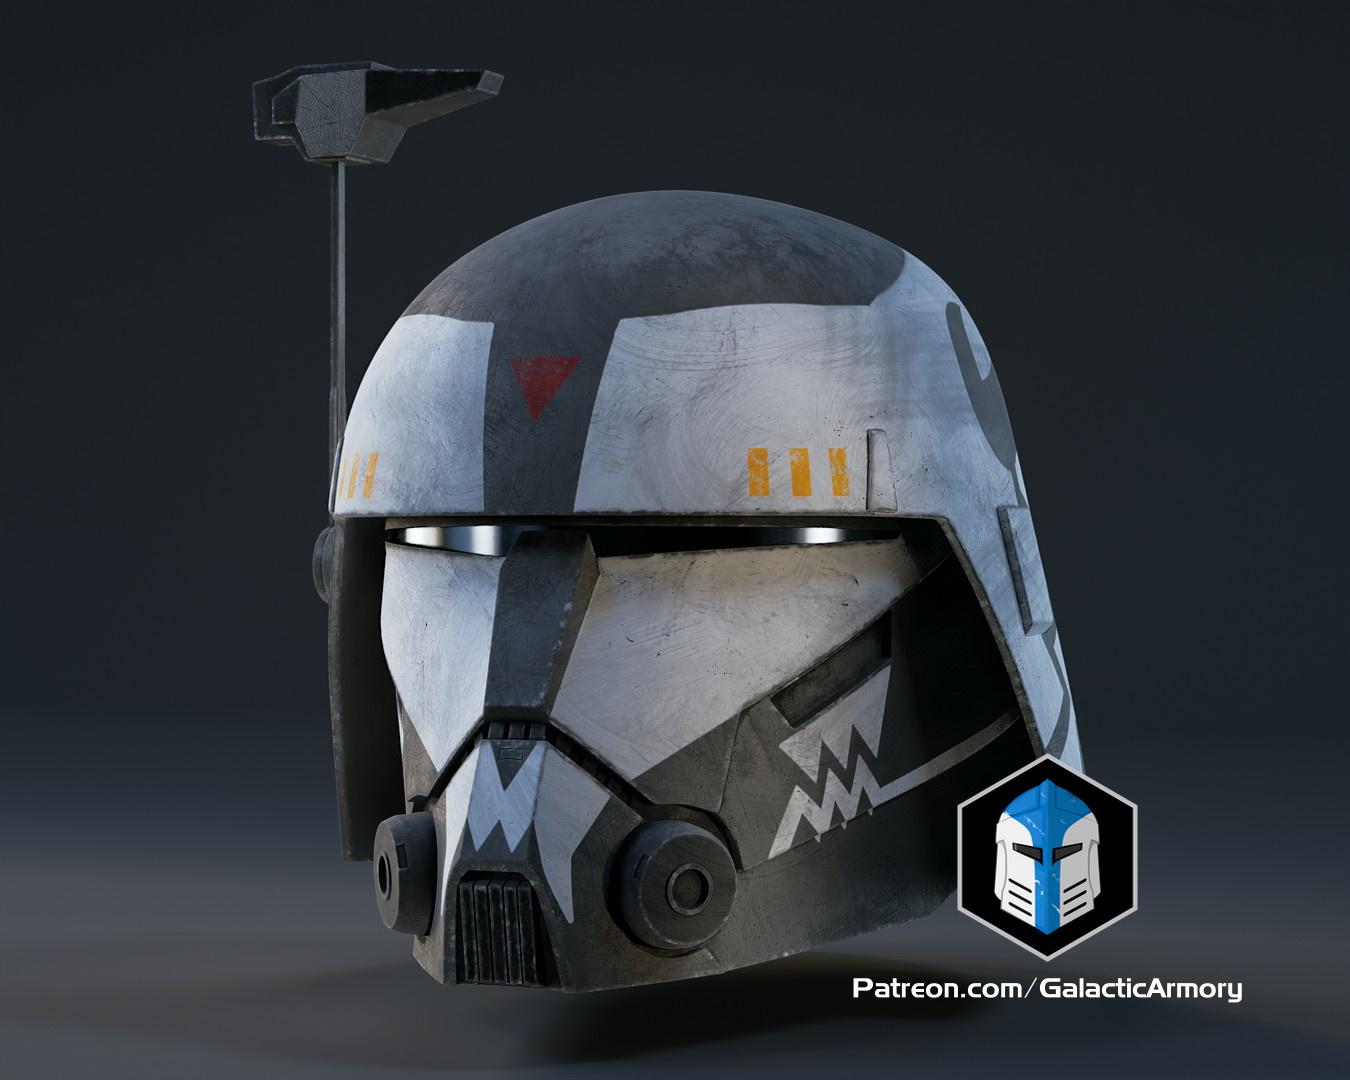 [New Files!] The Desert Wolffe Helmet has been added to the Specialist rewards!